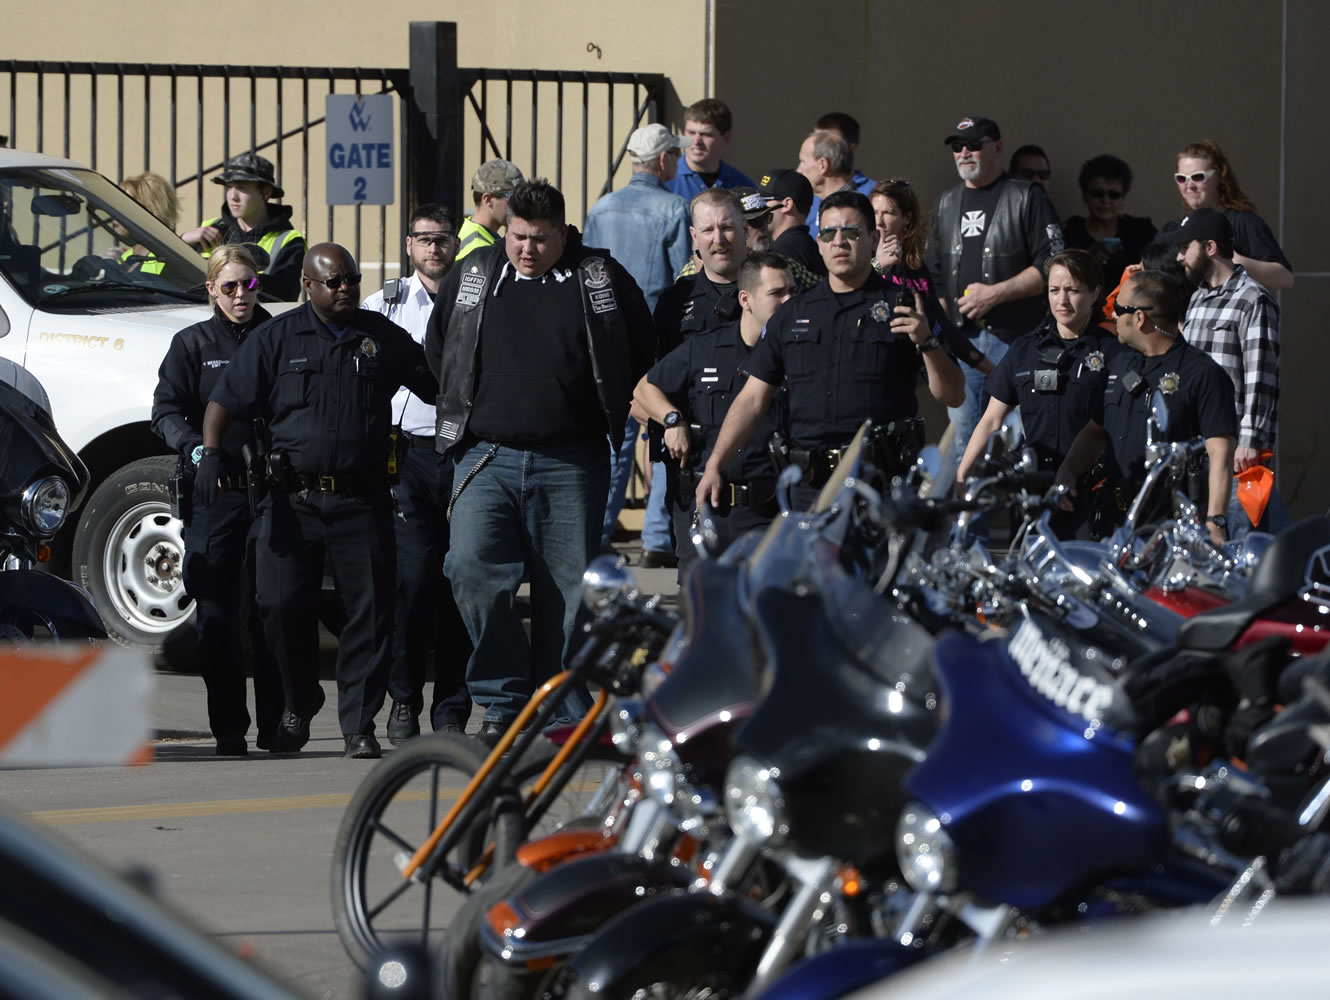 Denver Police escort a man away from the National Western Complex on Saturday in Denver. Denver police say multiple people were injured in a deadly stabbing and shooting at The Colorado Motorcycle Expo.